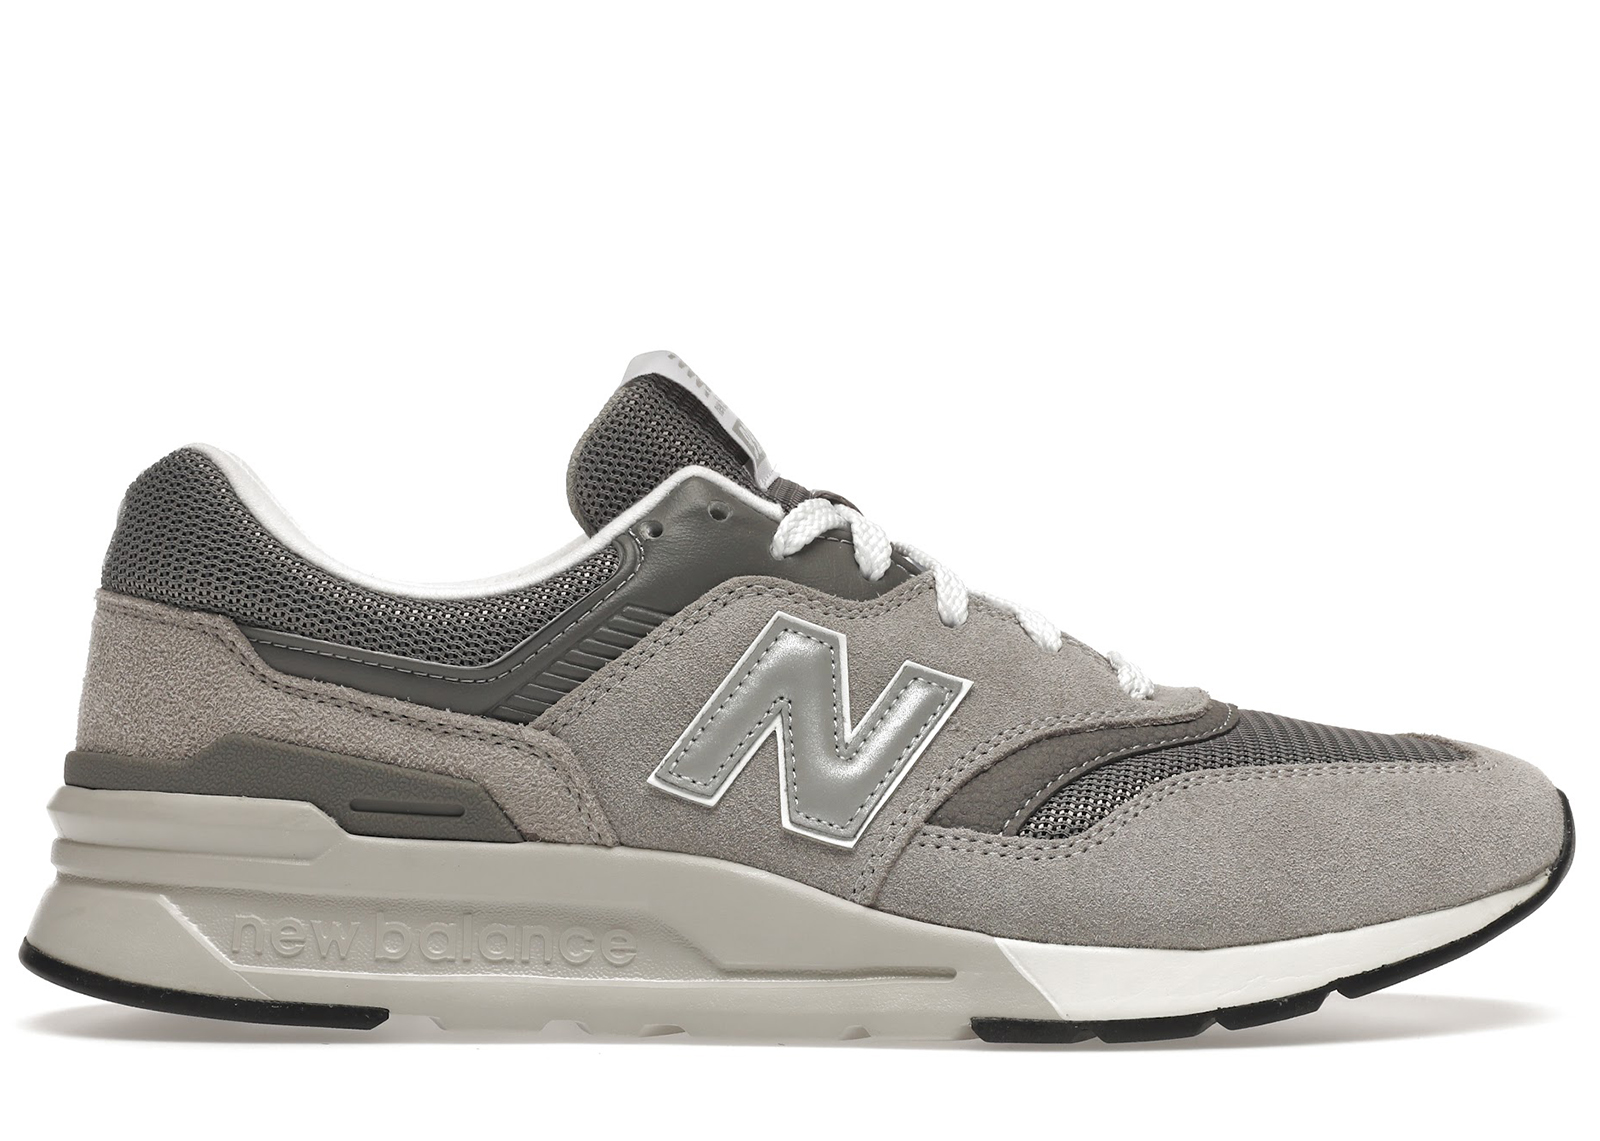 Buy New Balance 997 Shoes & New Sneakers - StockX